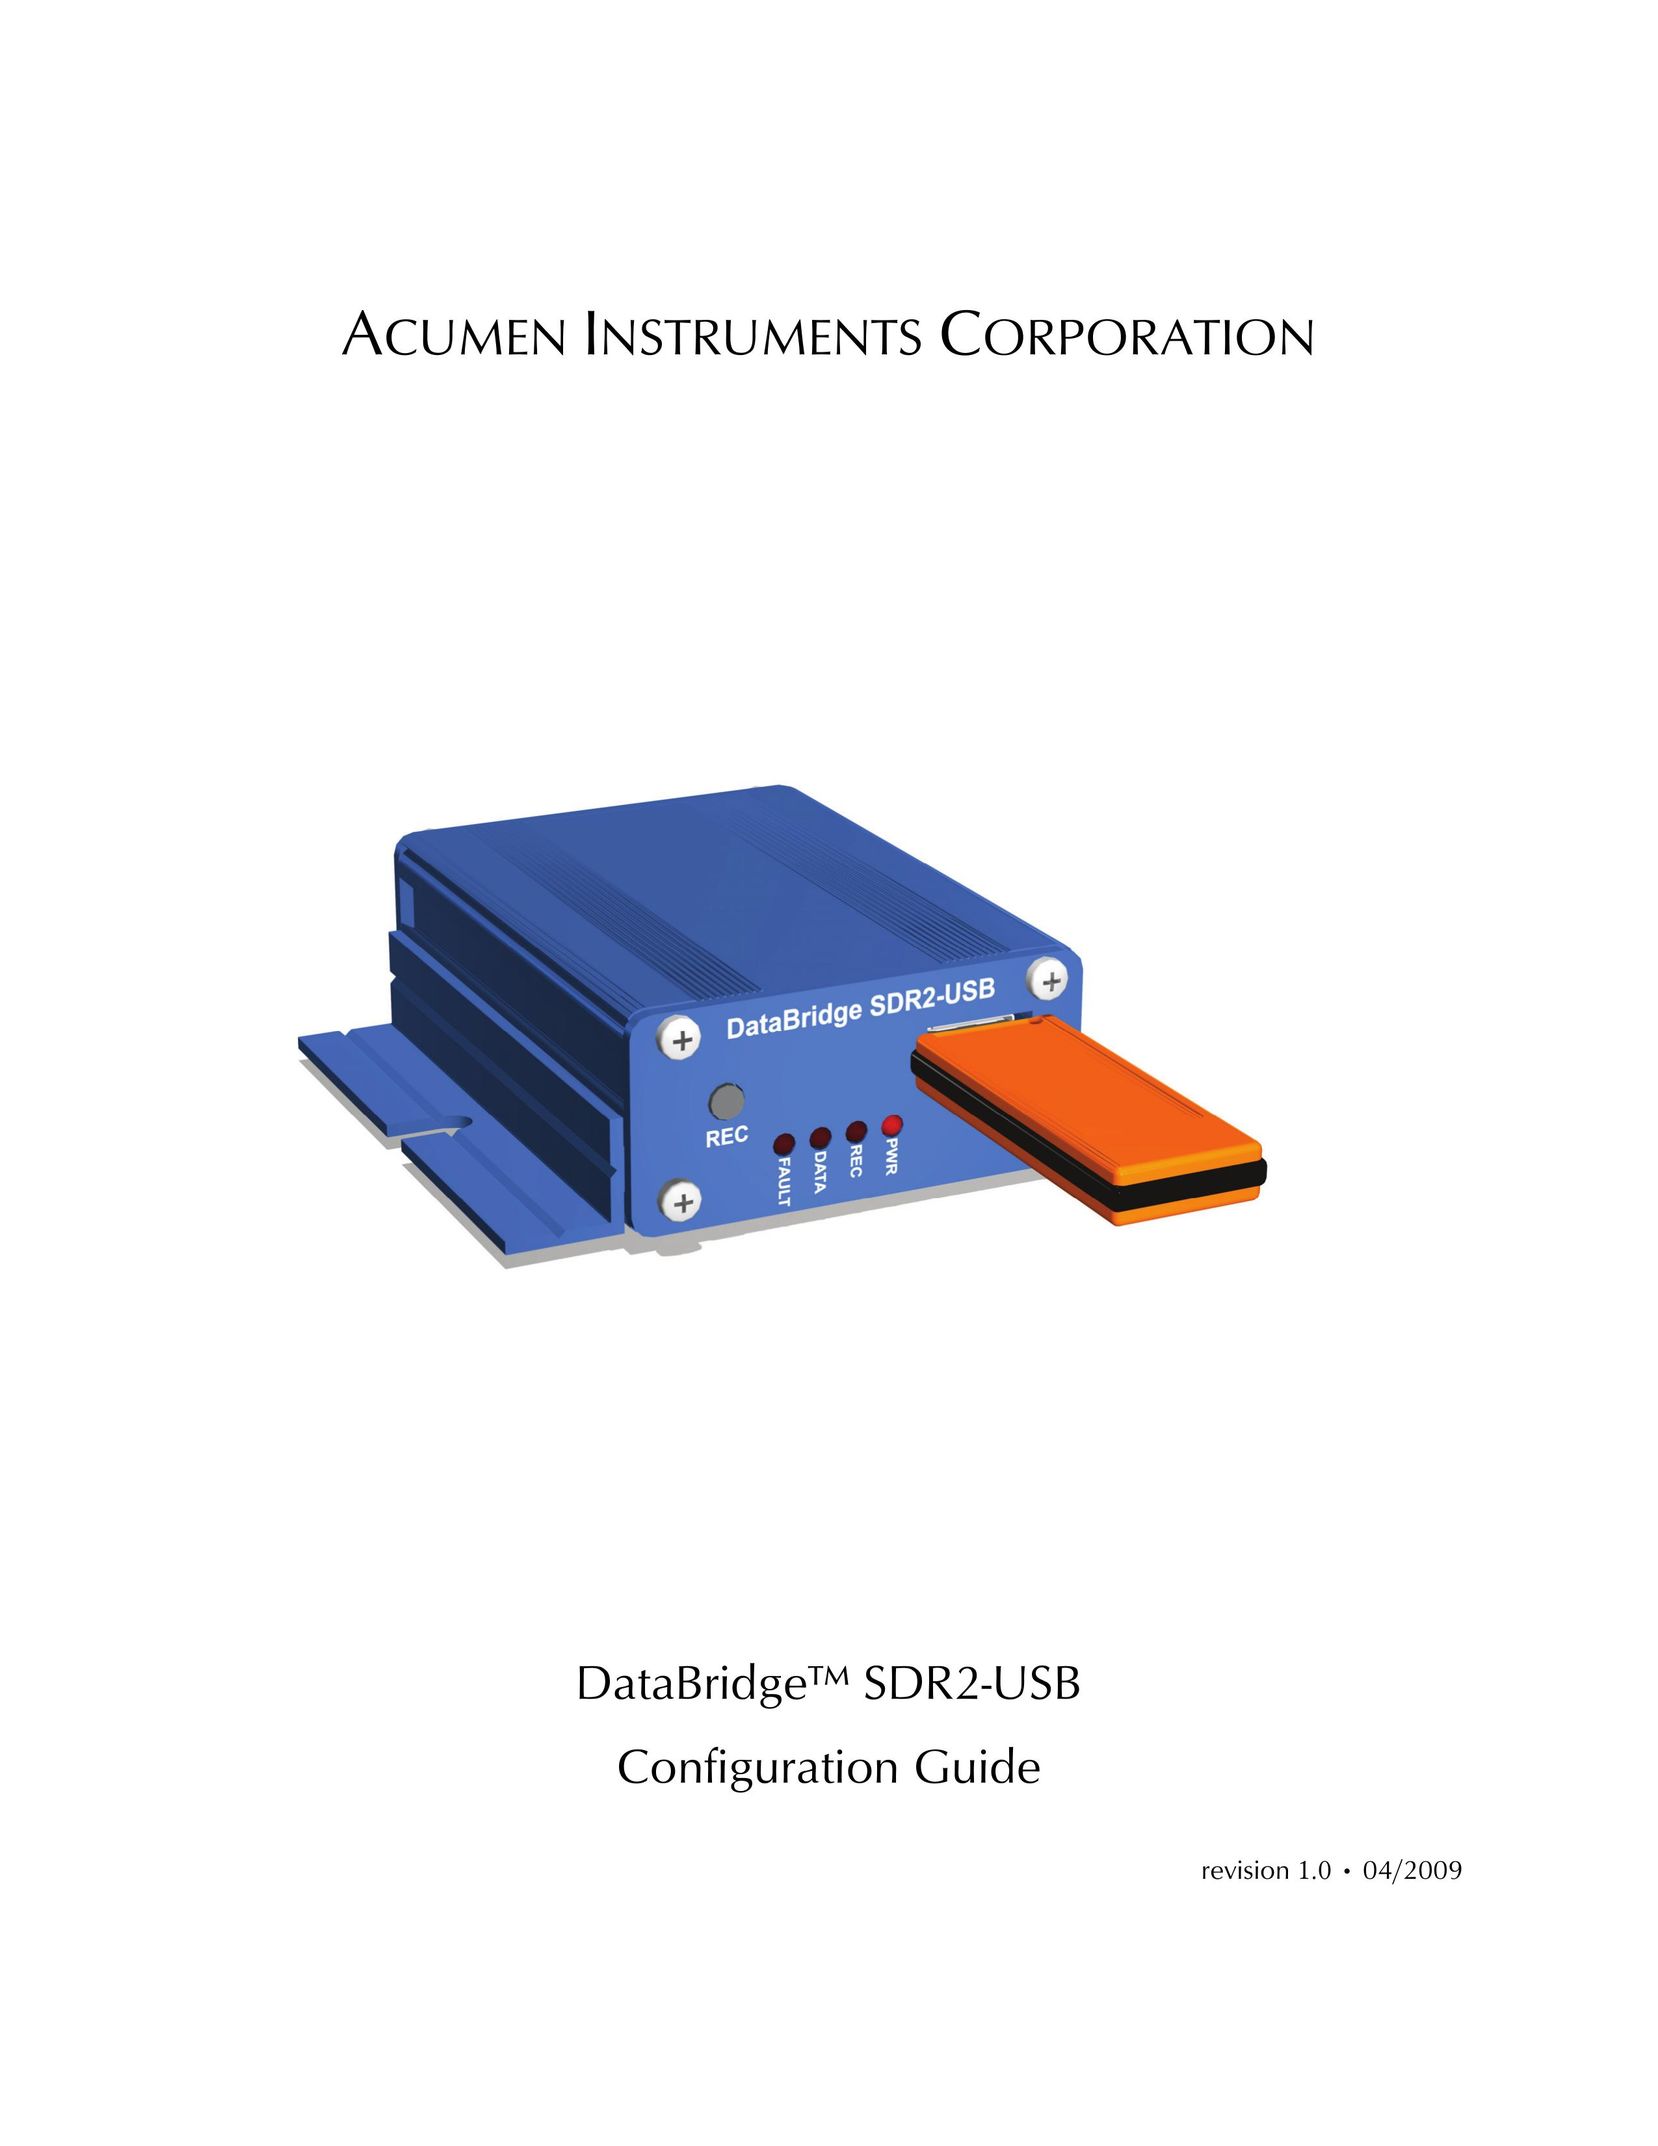 Acumen SDR2-USB Barcode Reader User Manual (Page 1)